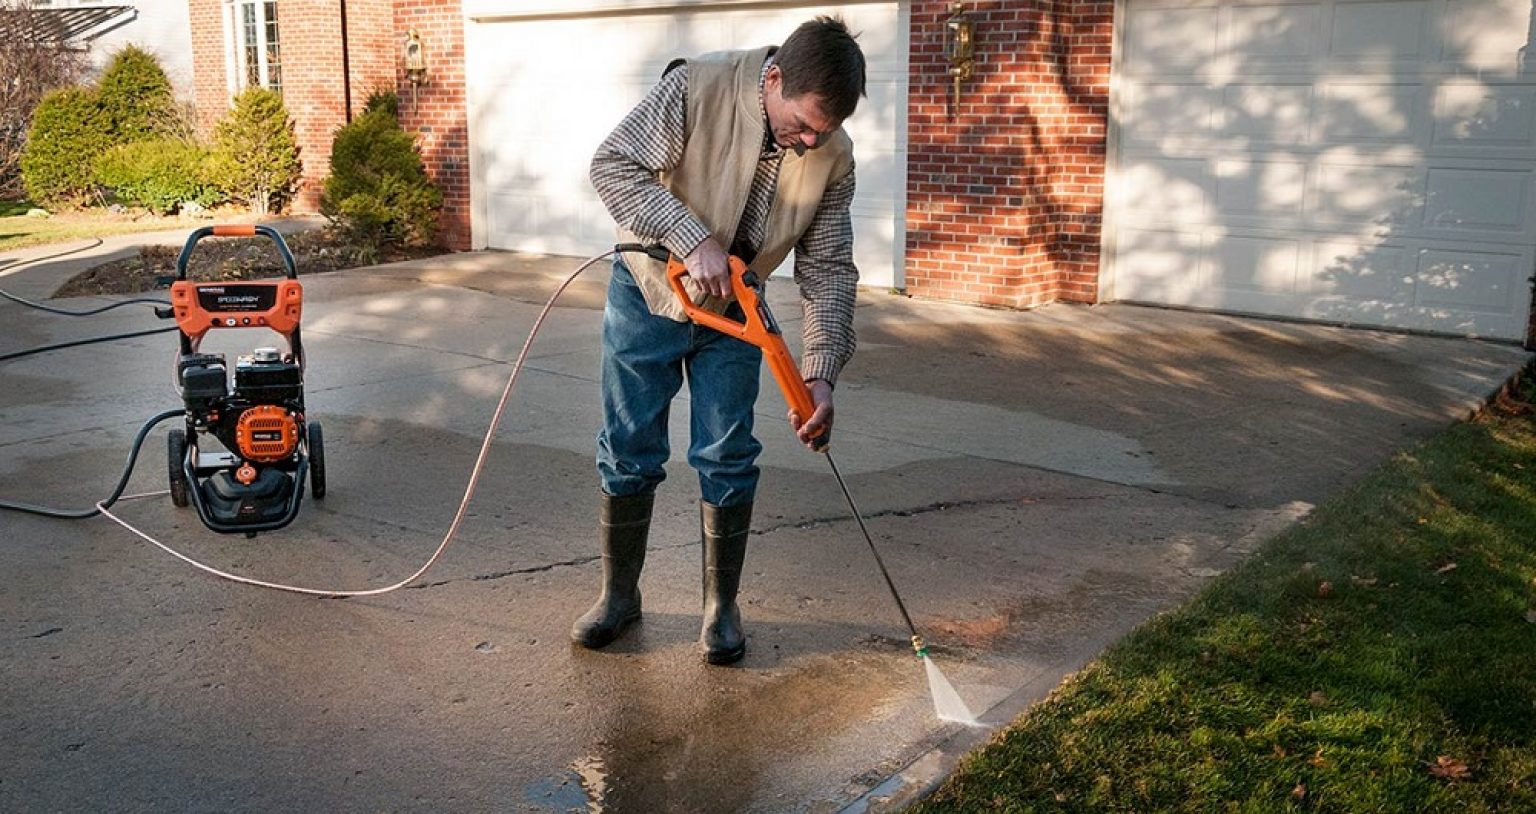 Best Pressure Washer For Home Use